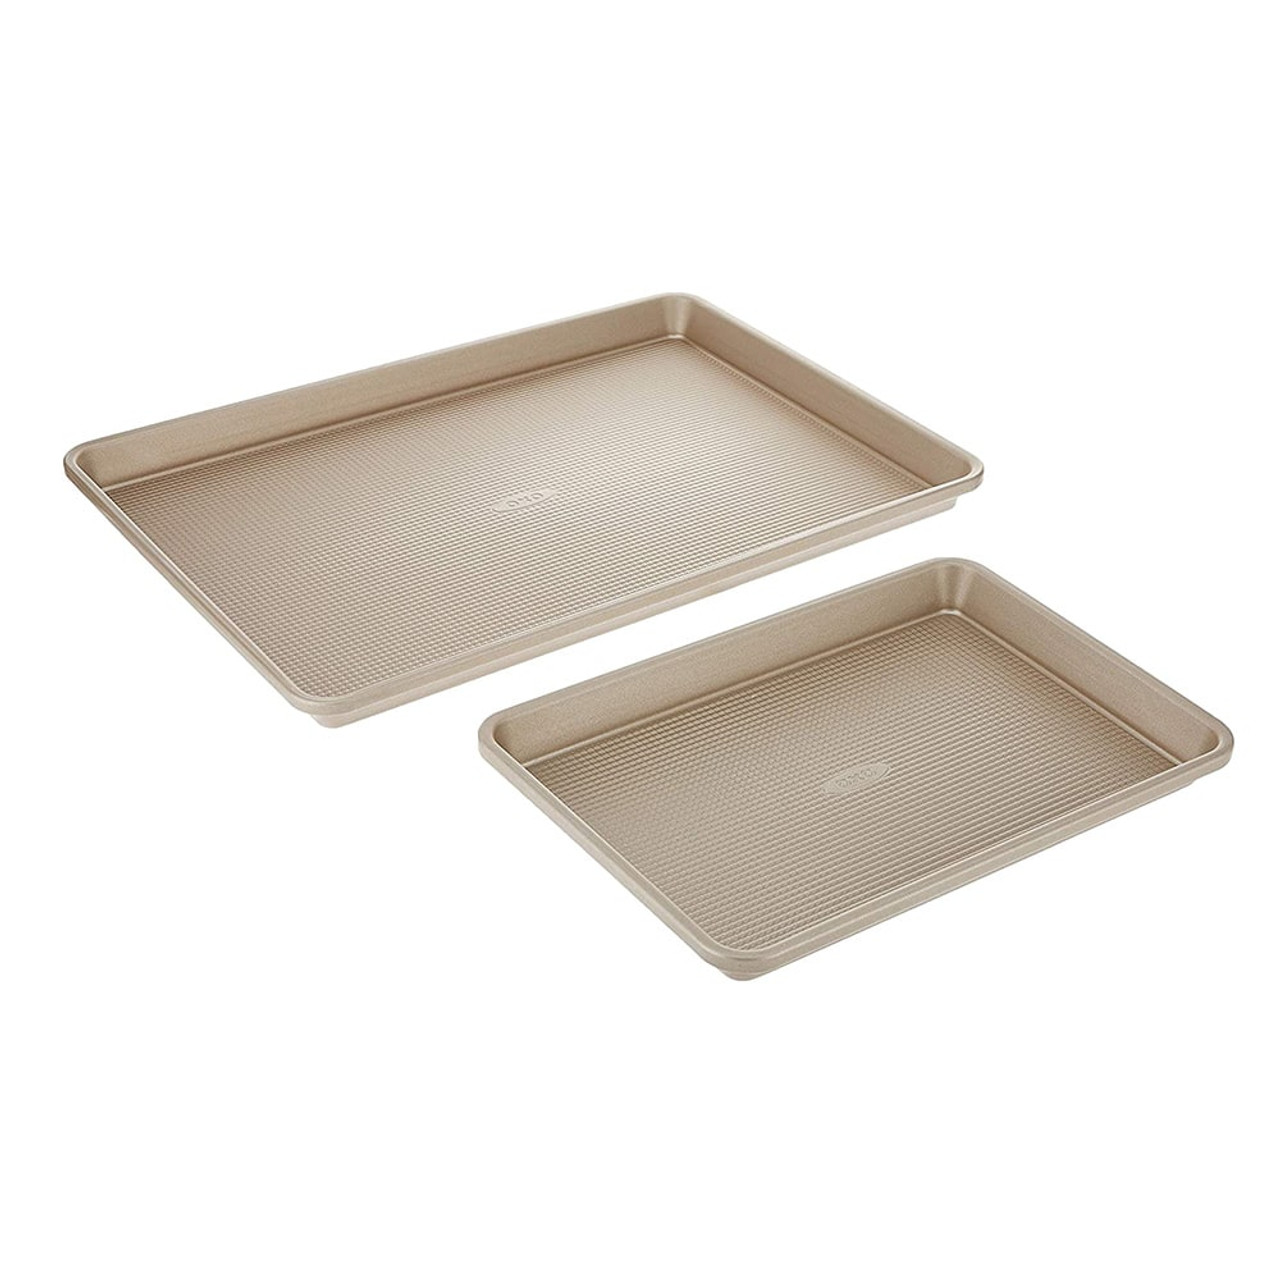 https://cdn11.bigcommerce.com/s-hccytny0od/images/stencil/1280x1280/products/4006/14691/oxo-good-grips-nonstick-pro-2pc-sheet-pan-set__45140.1618143048.jpg?c=2?imbypass=on